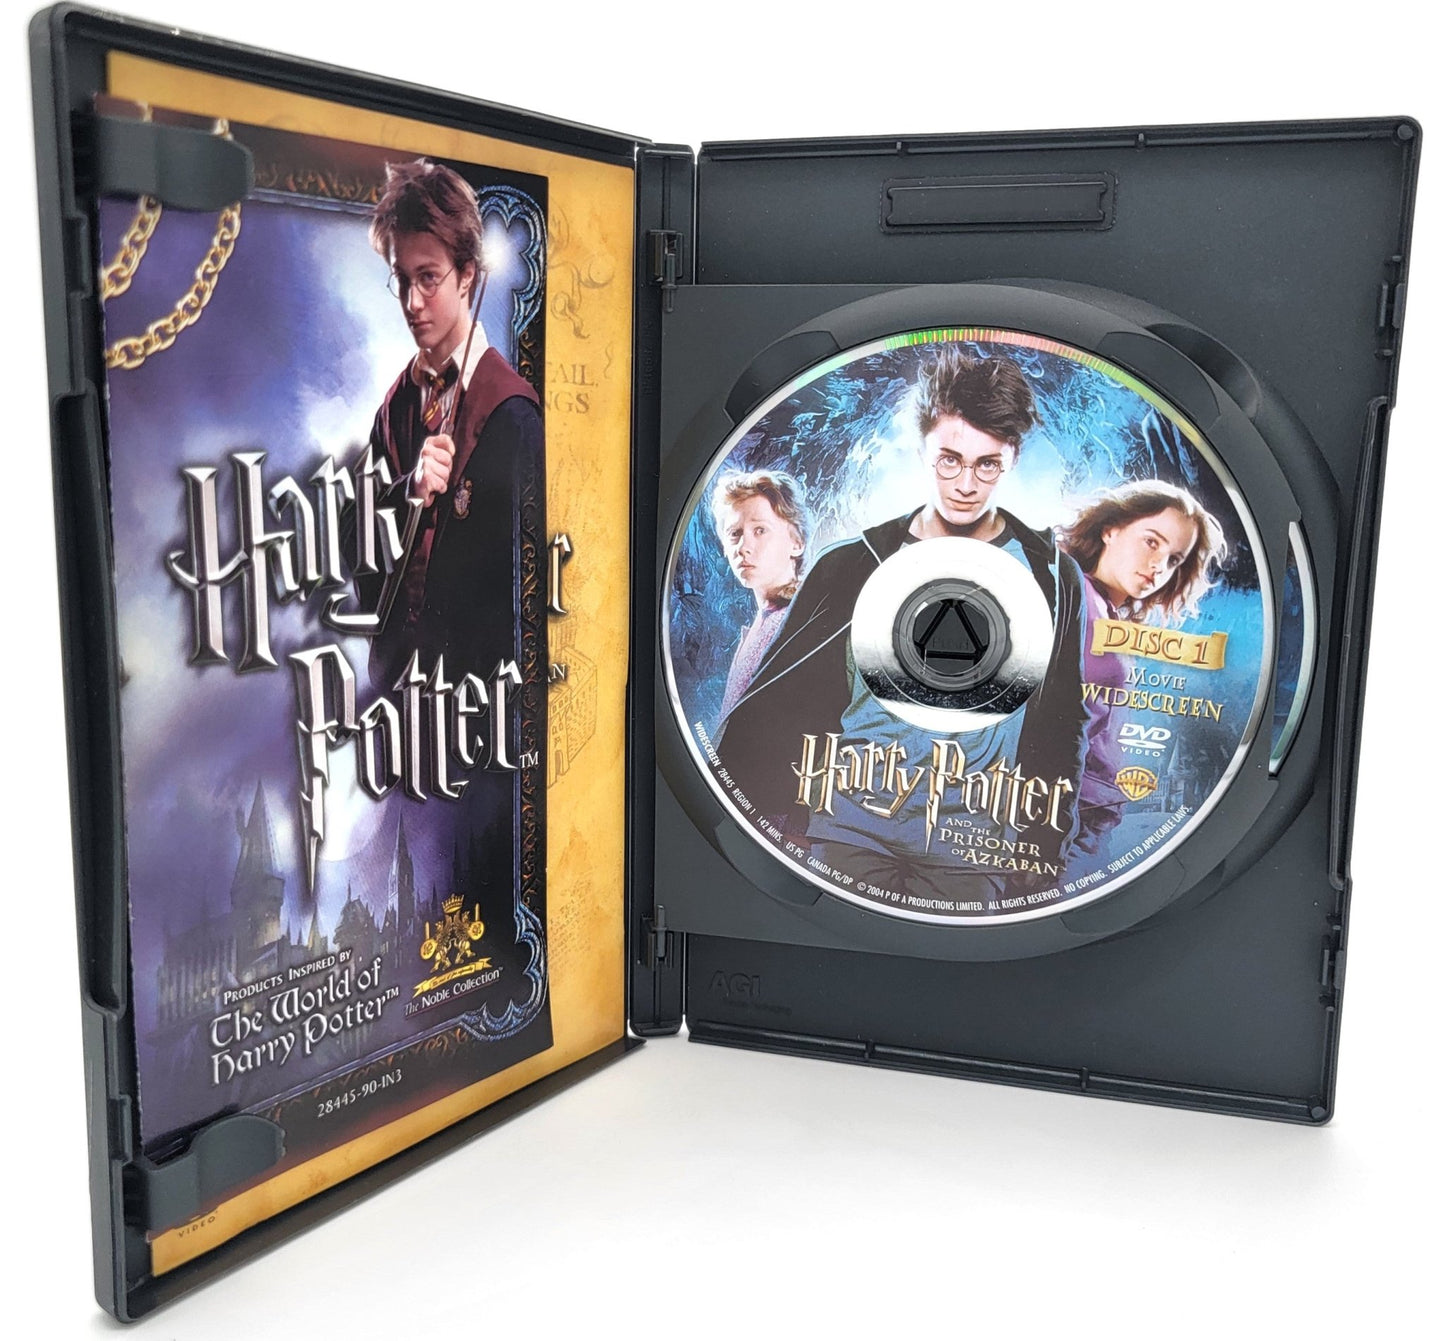 Warner Brothers - Harry Potter and The Prisoner of Azkaban | DVD | 2 Disc Widescreen Edition - DVD - Steady Bunny Shop